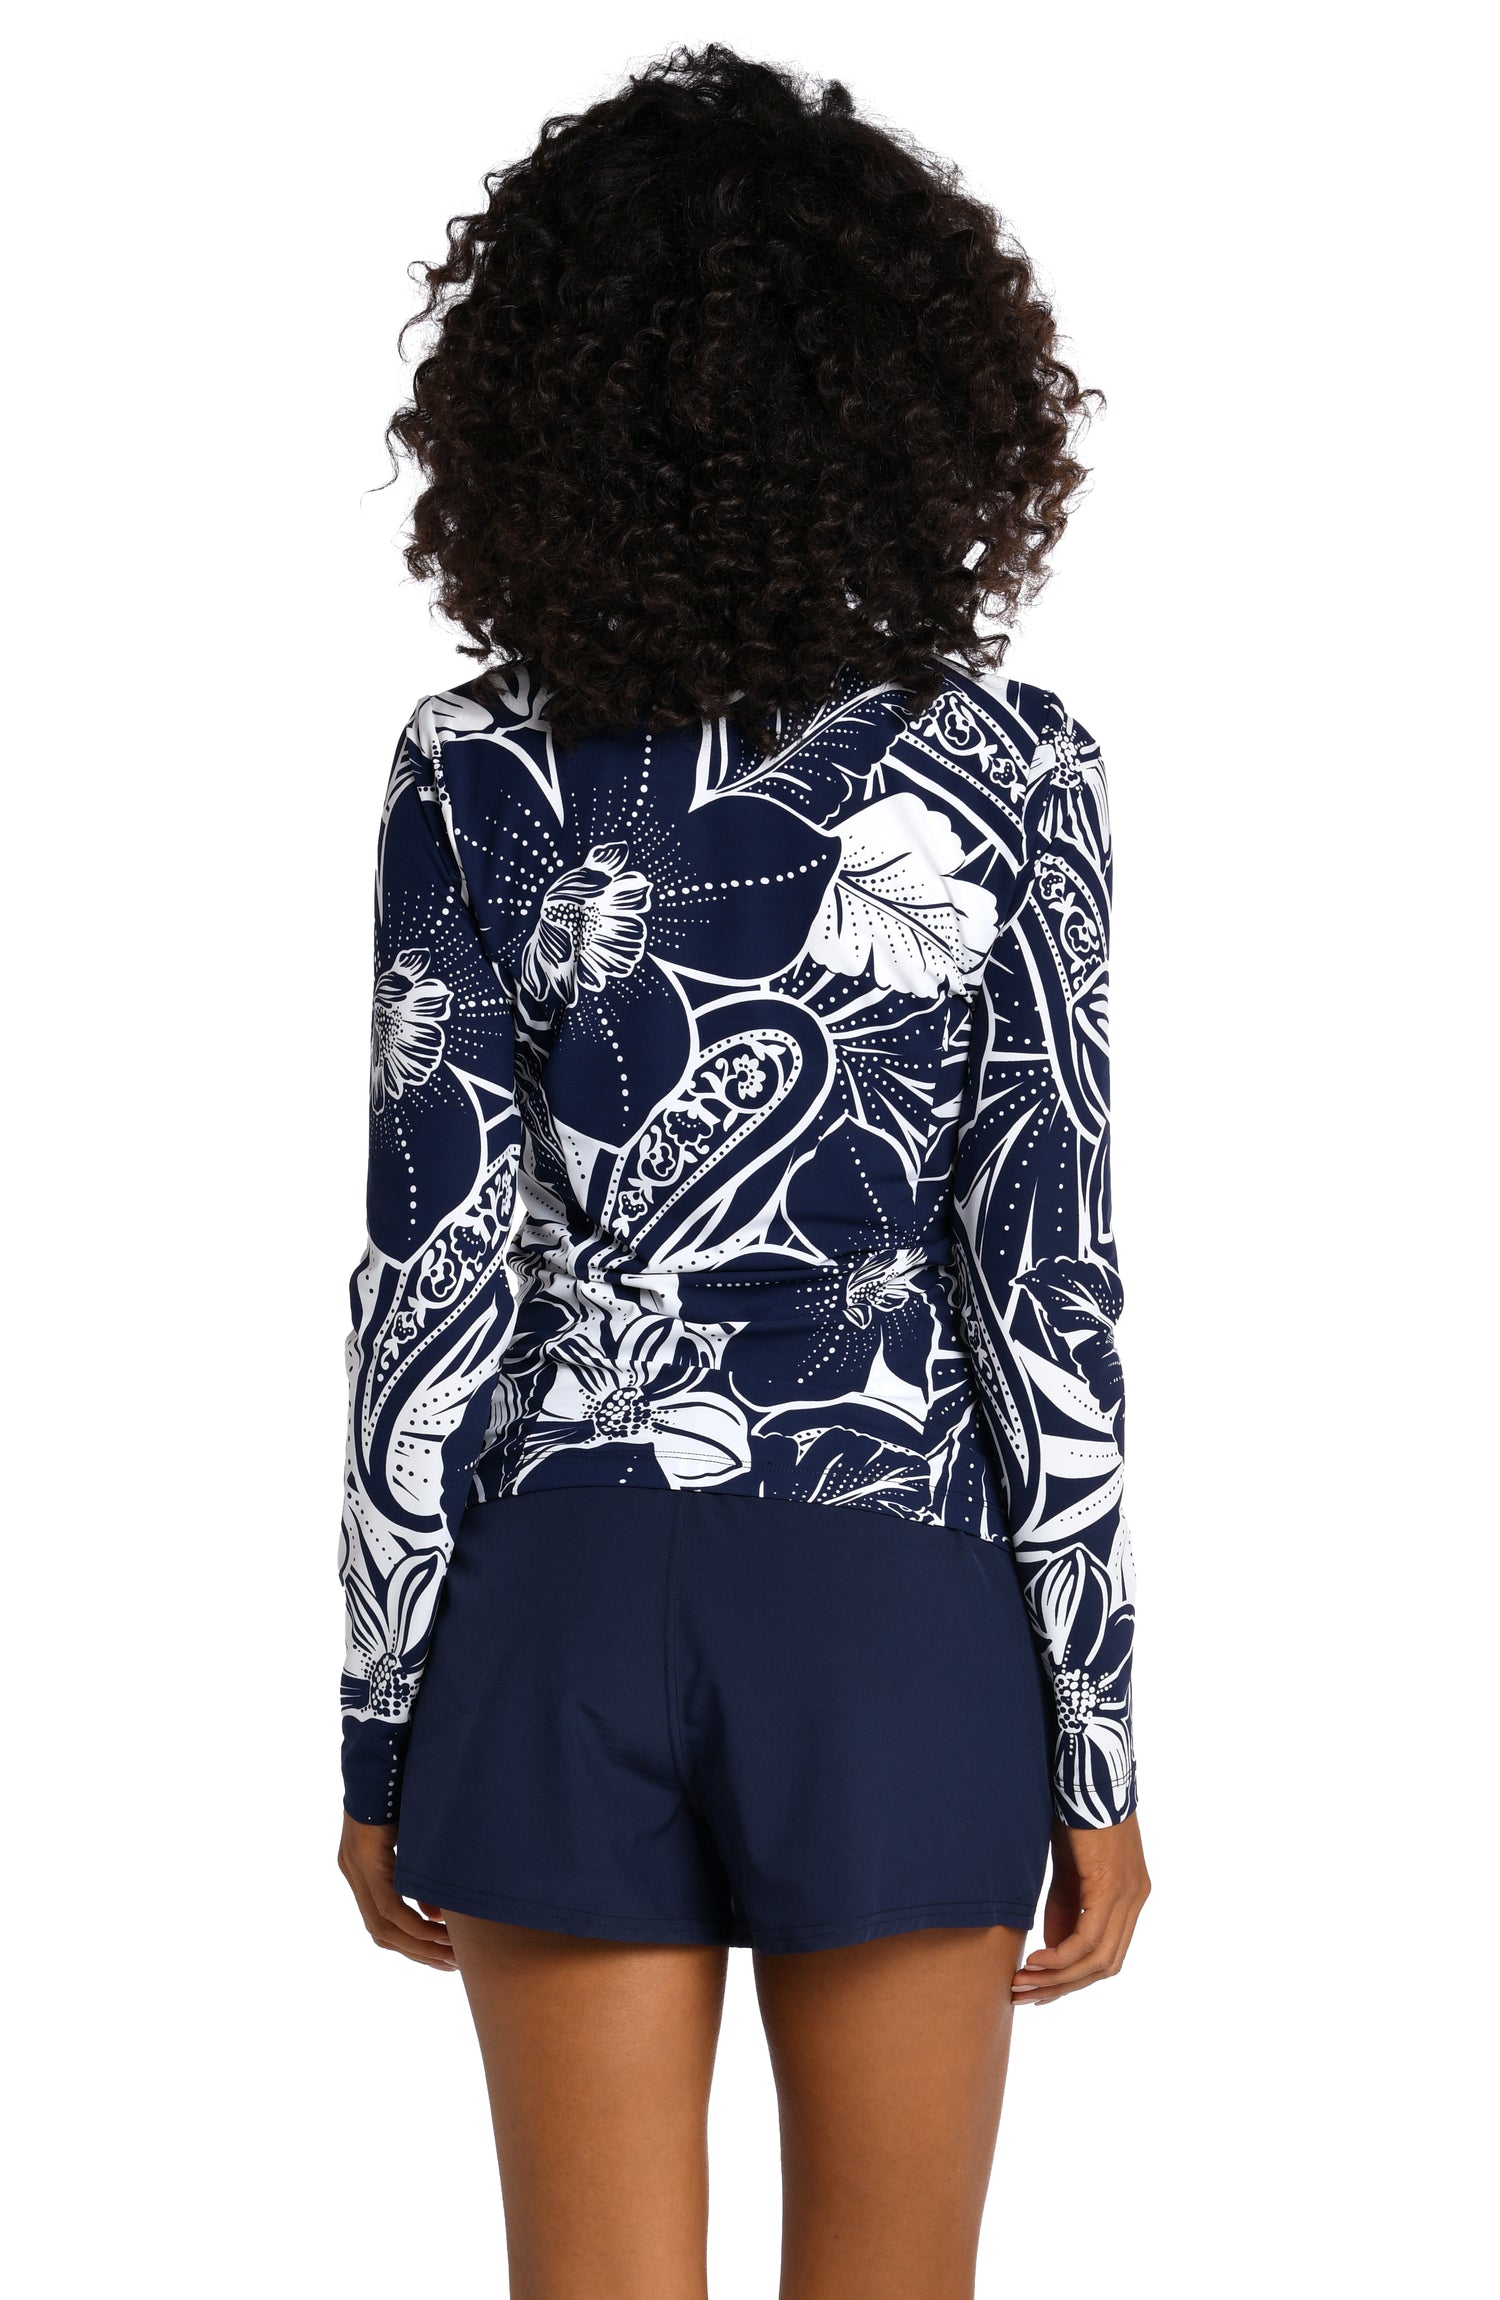 Model is wearing an indigo colored print with pops of white on this half zip rashguard top from our At the Playa collection!